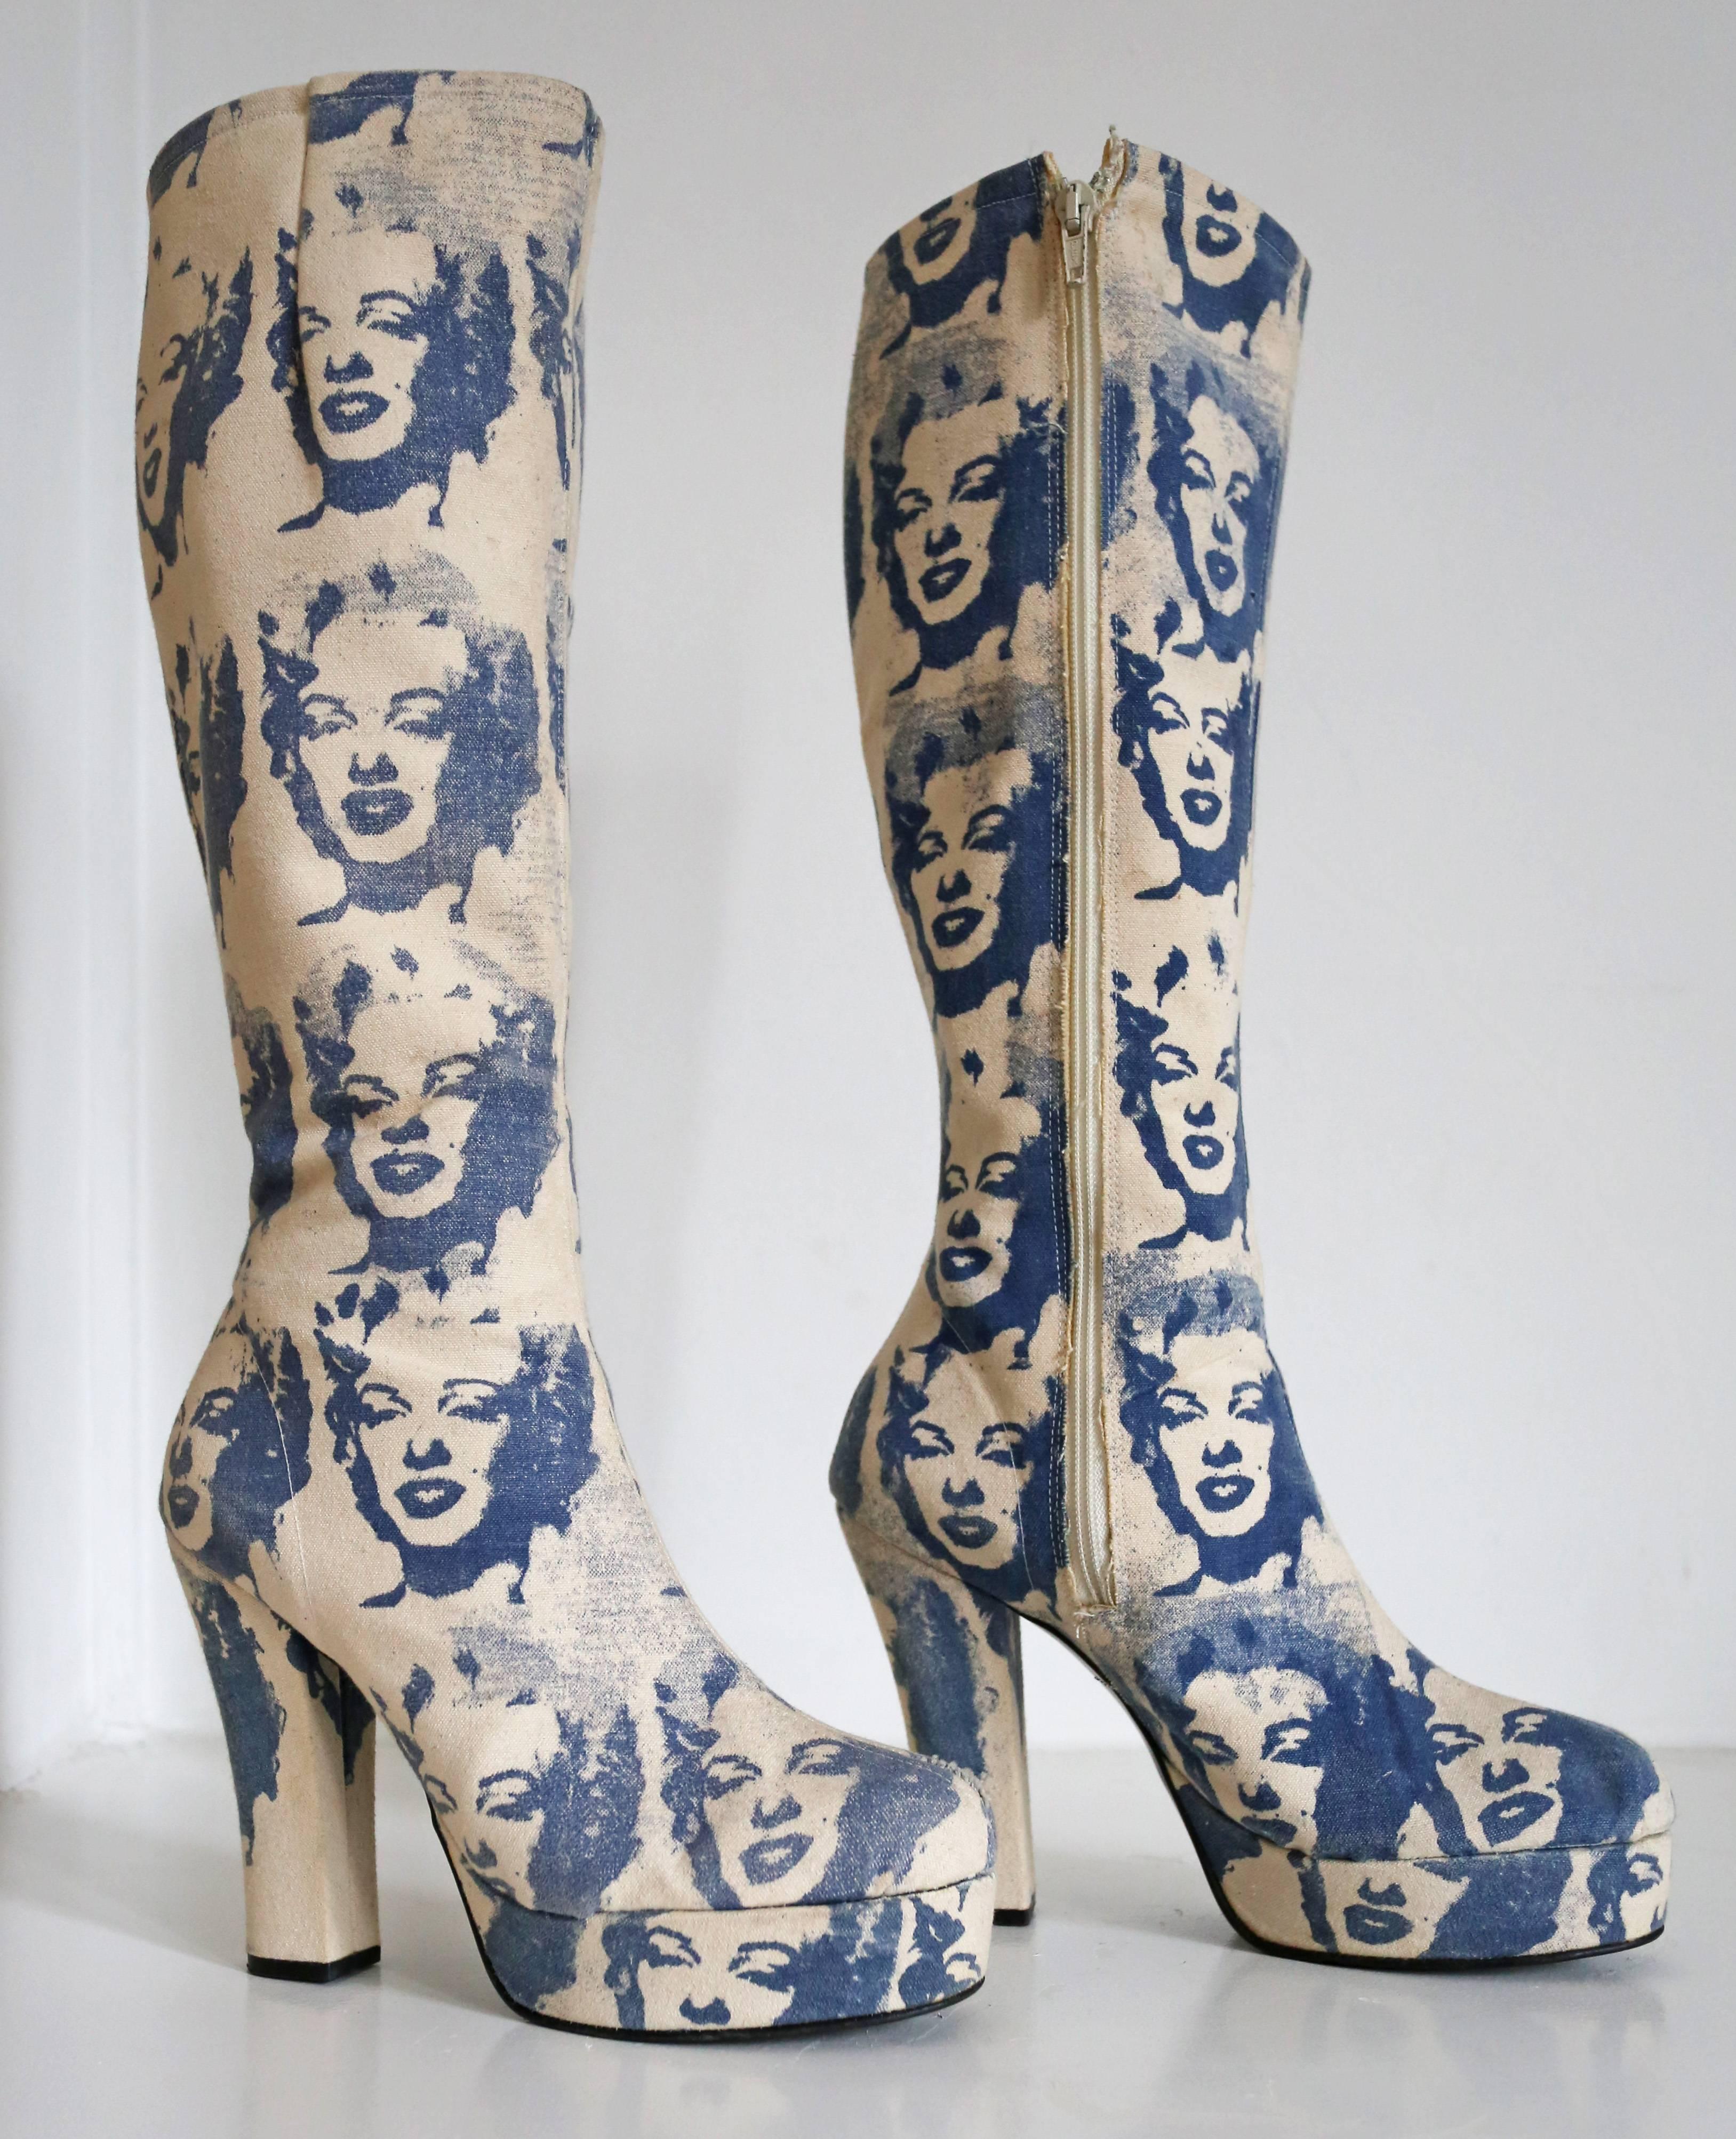 Presenting an original pair of 1960s canvas platform boots, adorned with the iconic screen printed artwork of Andy Warhol's 'Marilyn Diptych'.

These extraordinary boots boast the same style as Andy Warhol's renowned masterpiece 'The Marilyn